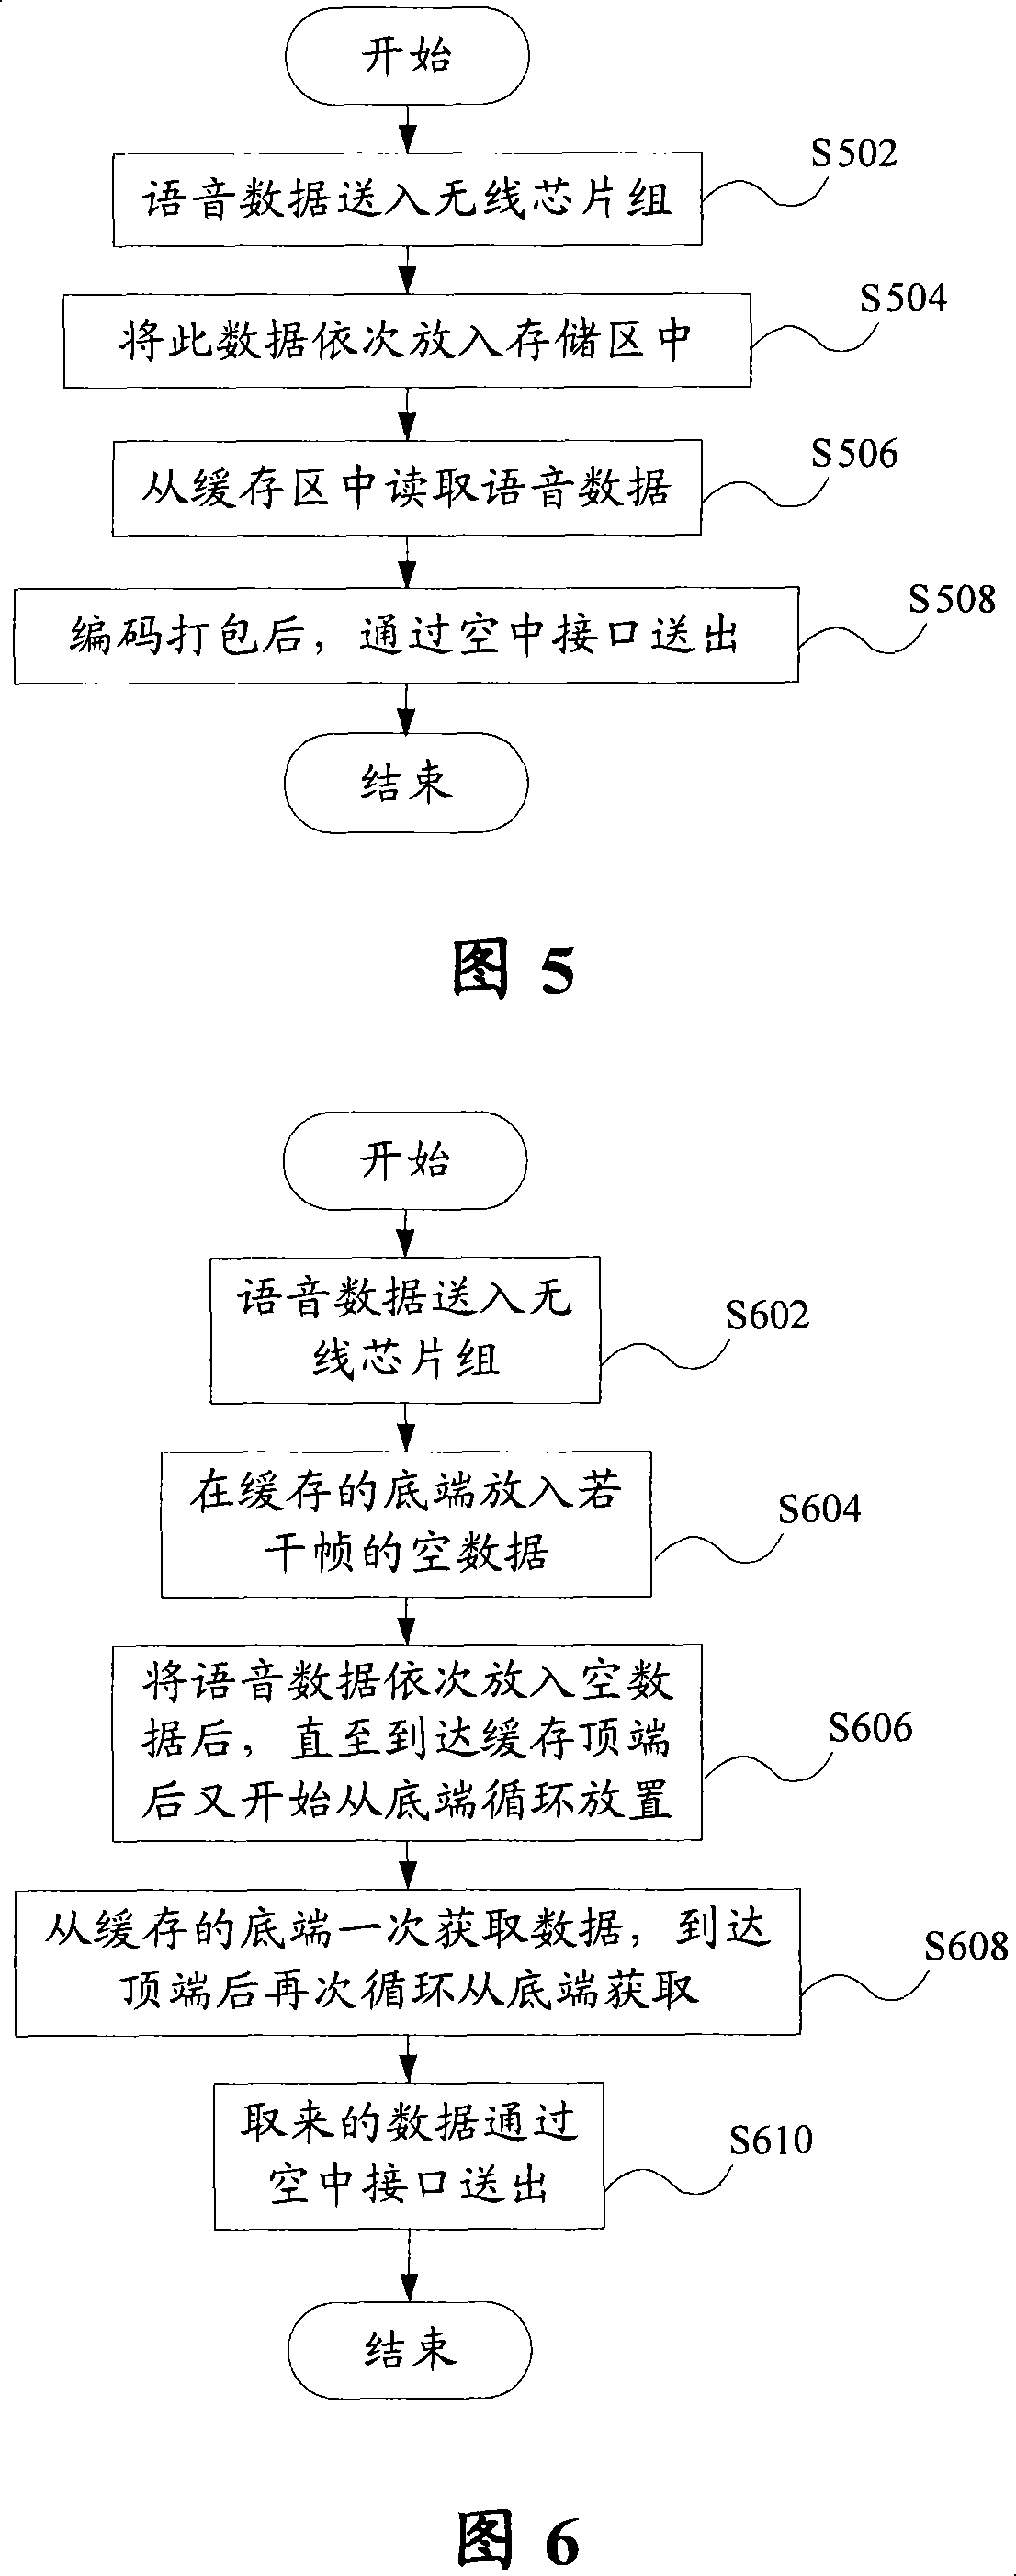 Abnormal voice data processing method and apparatus